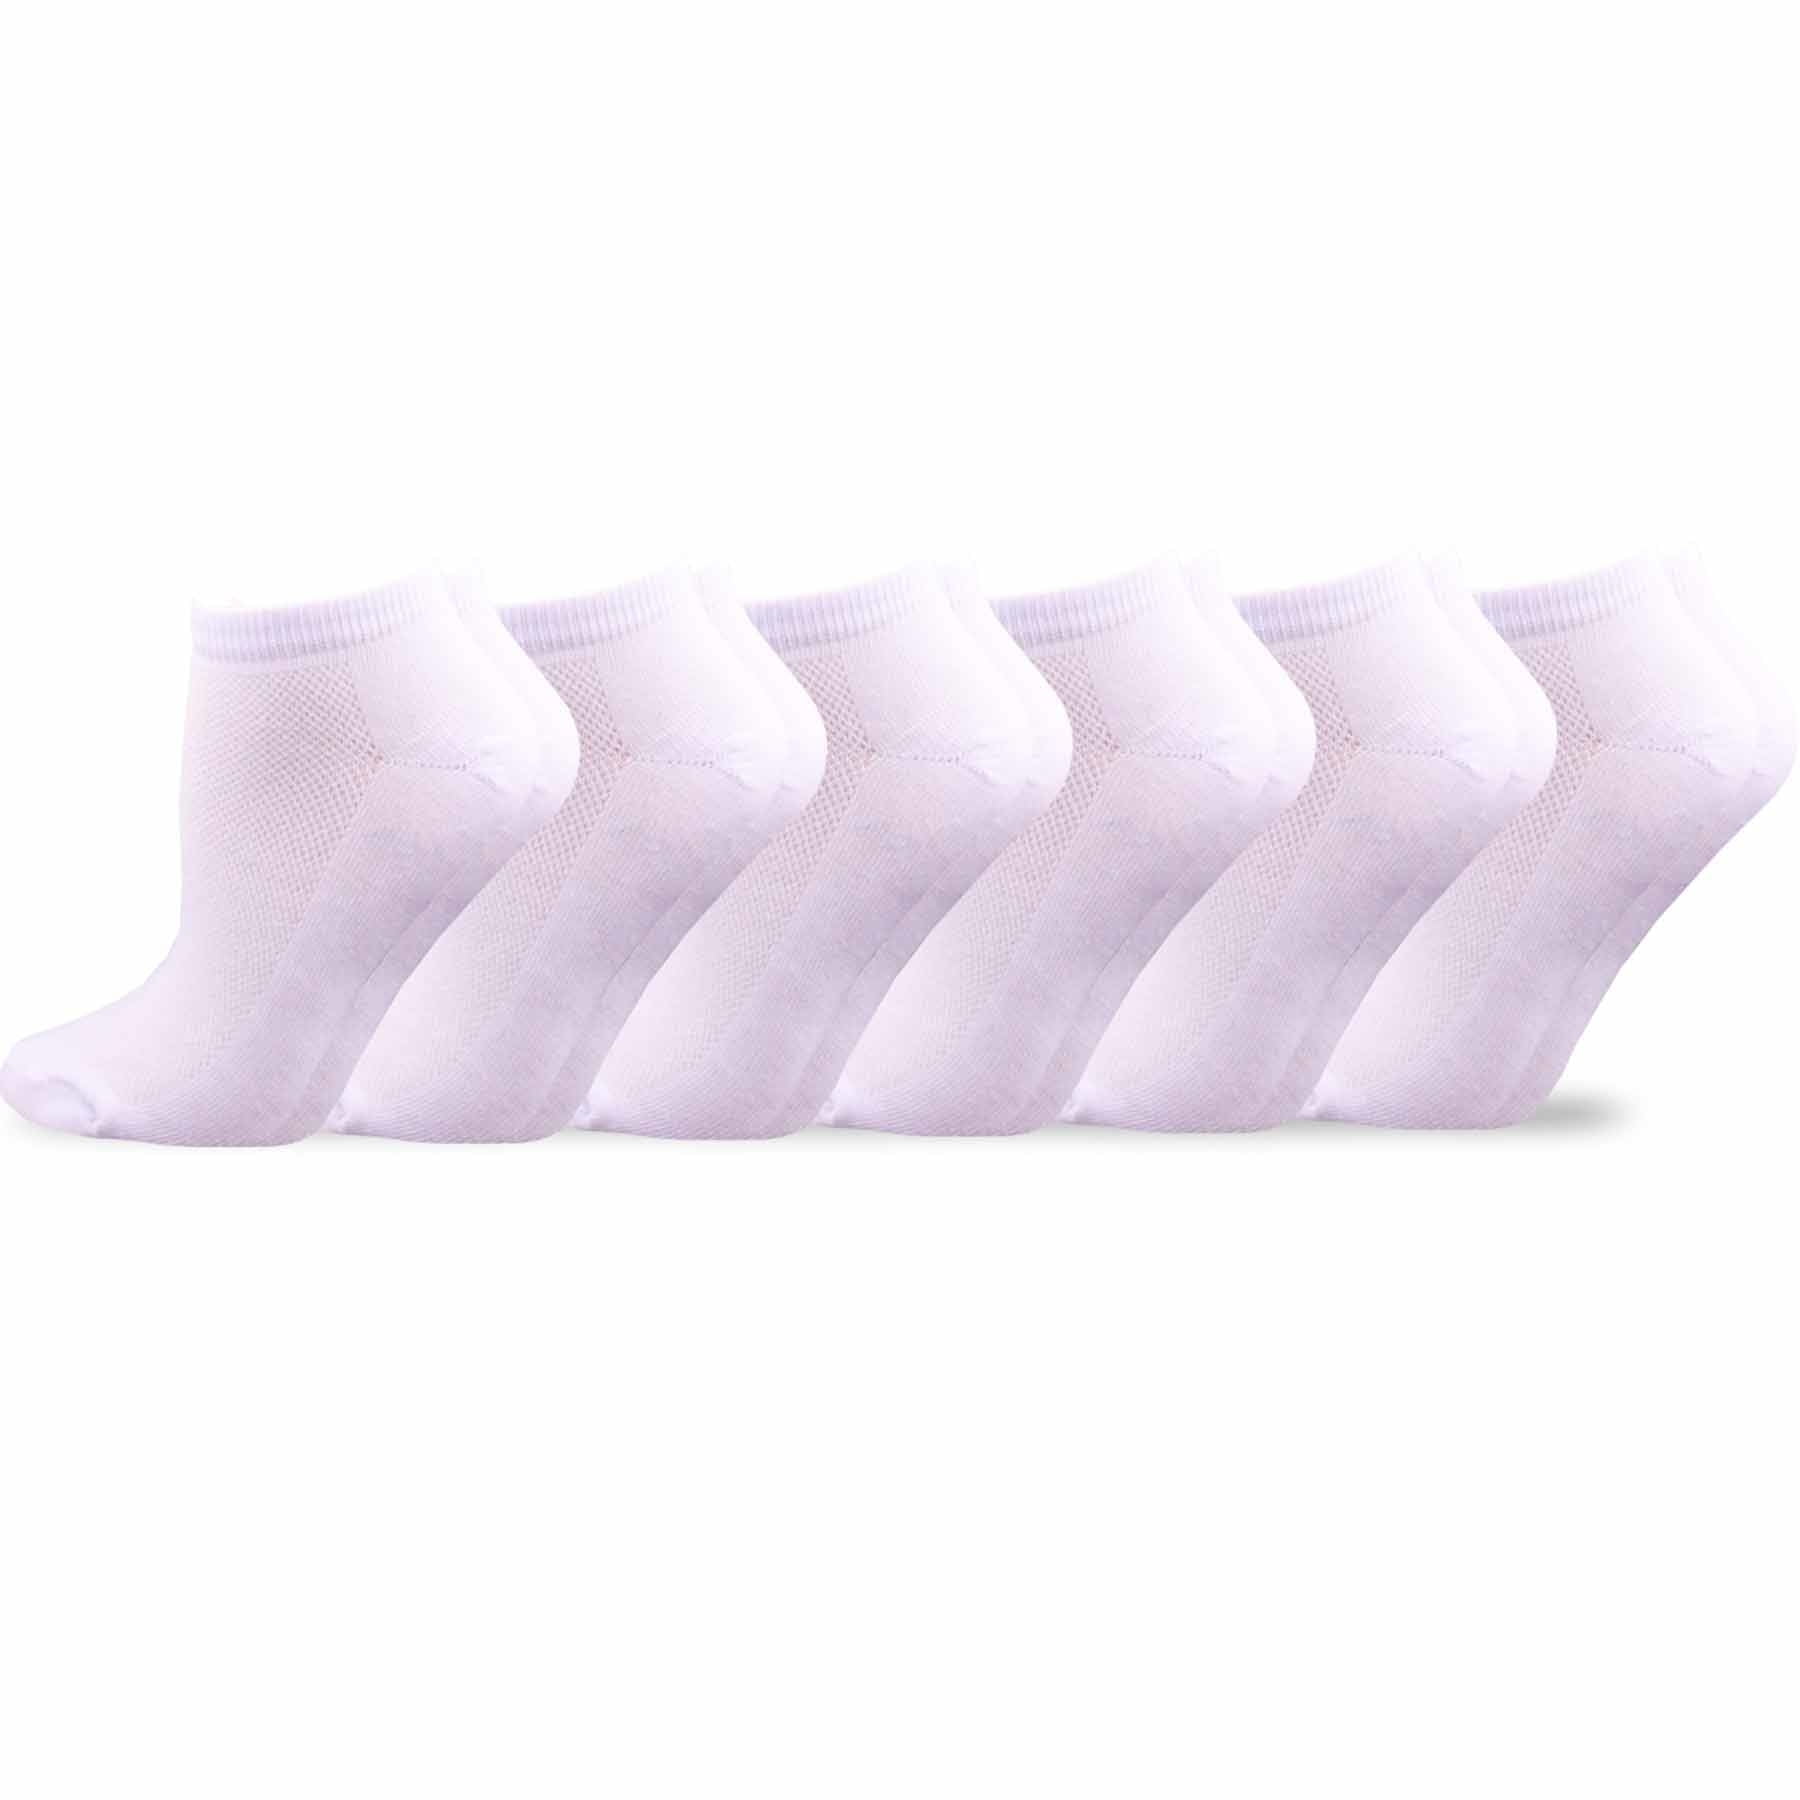 TeeHee Women's Acrylic No Show Low Cut Assorted Colors 6 Pair Pack 